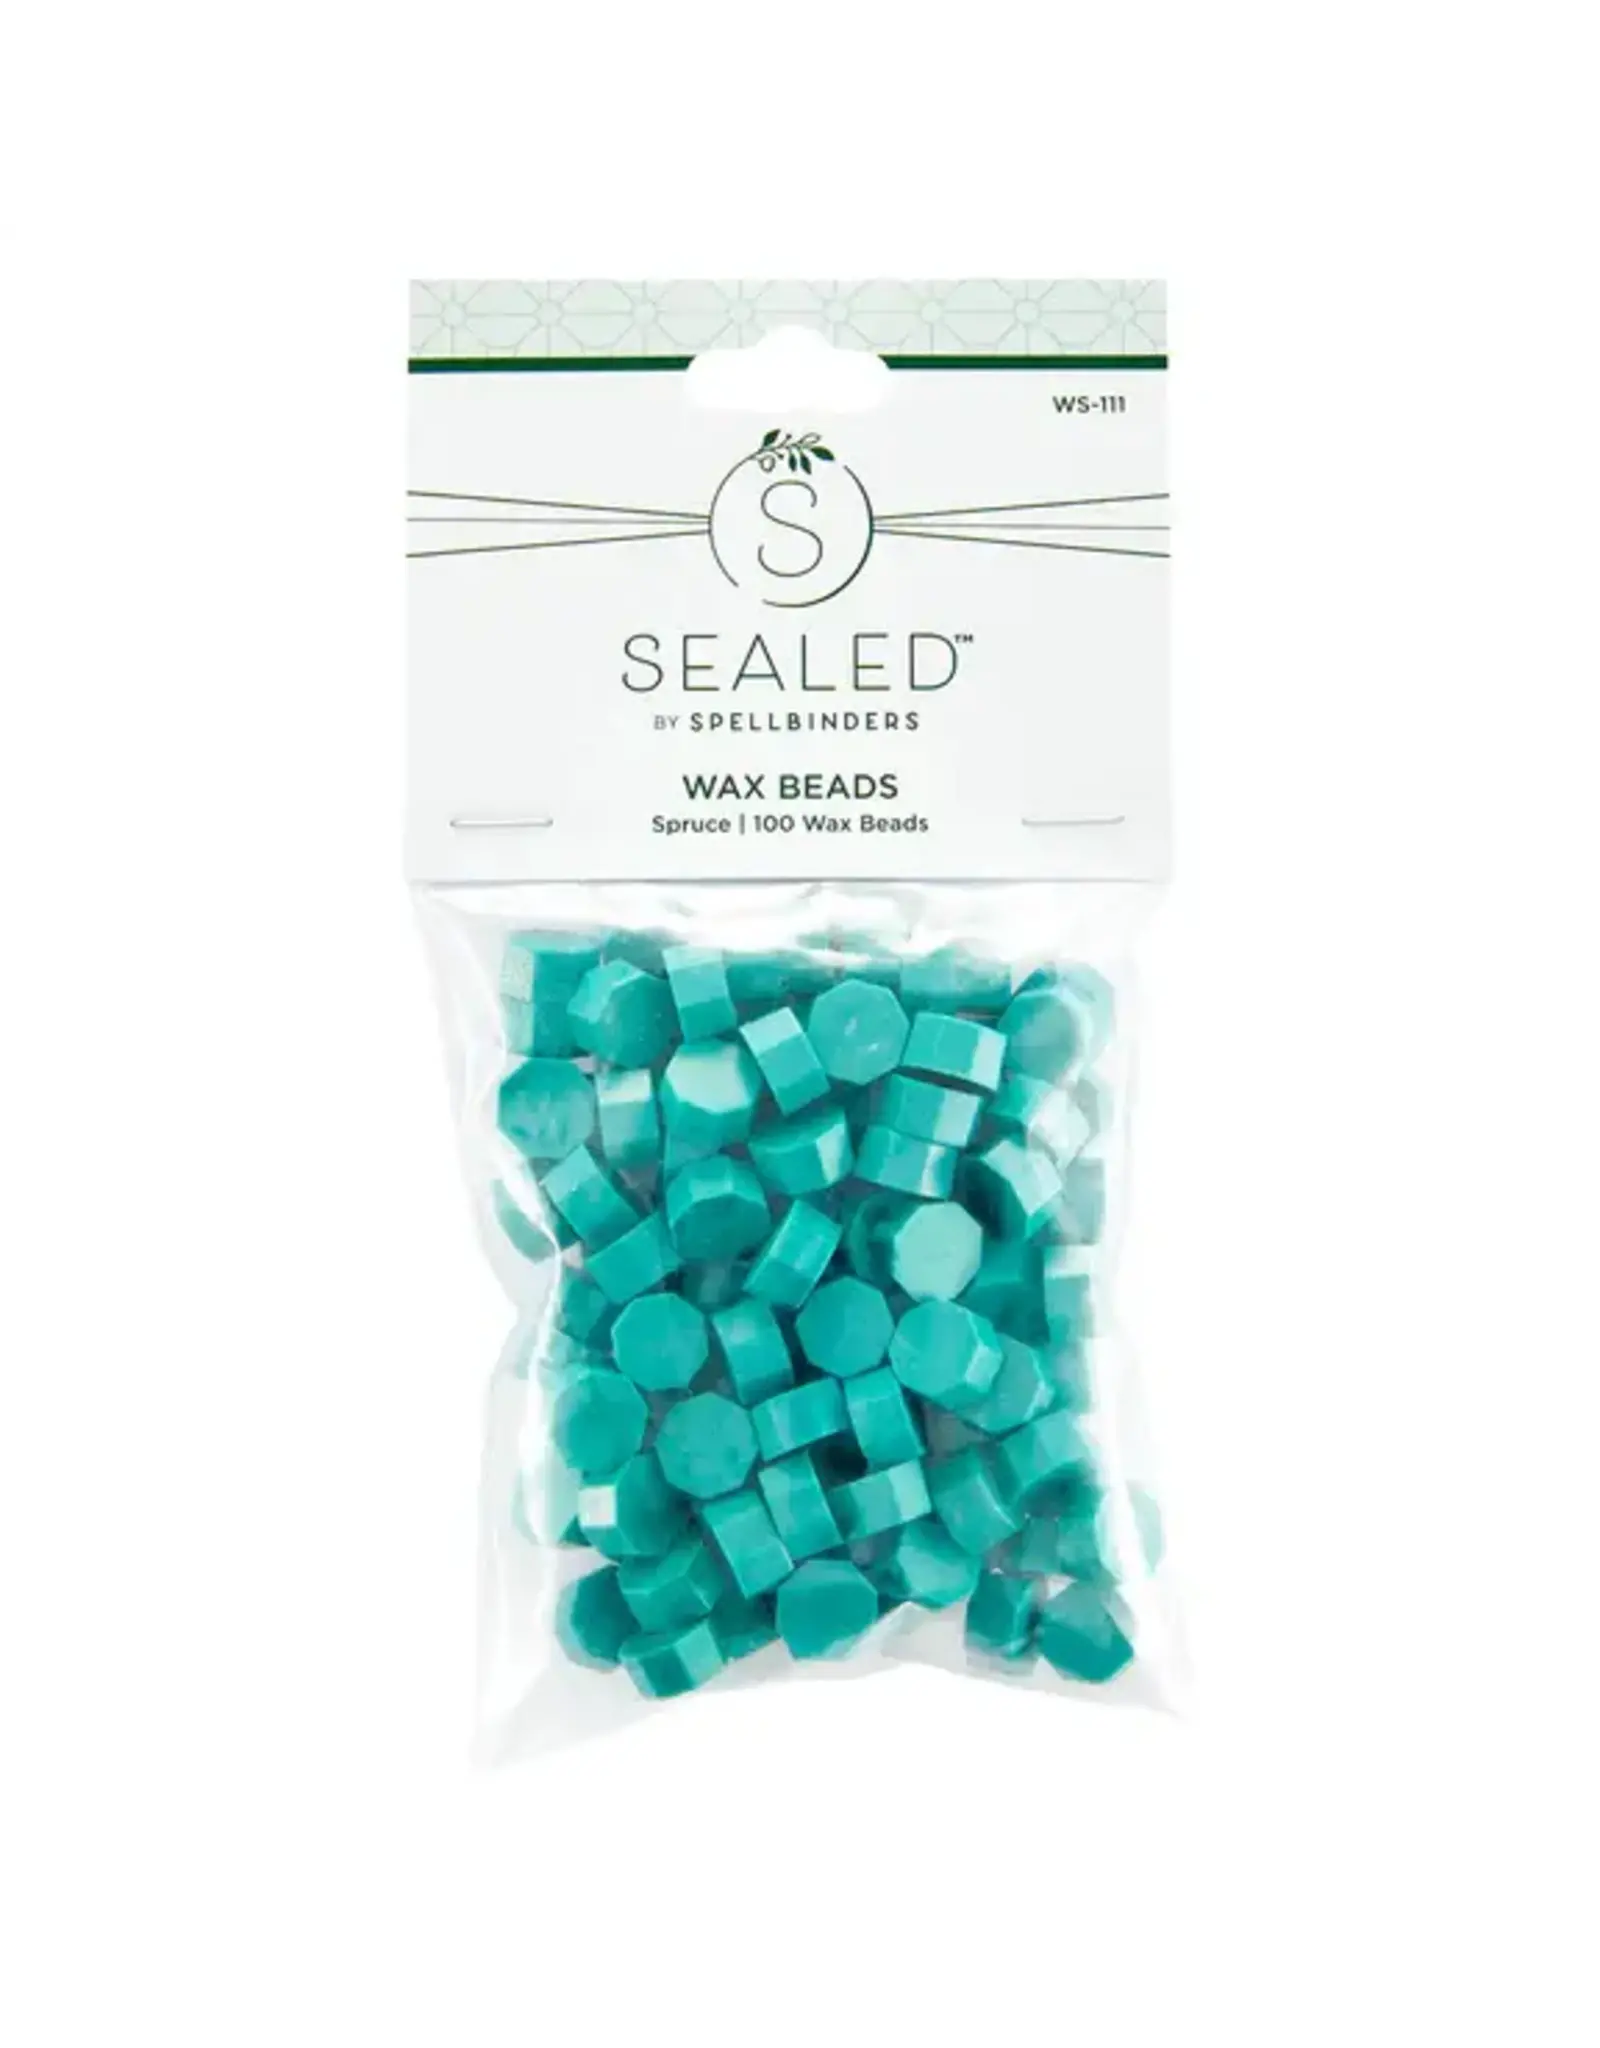 SPELLBINDERS SPELLBINDERS SEALED BY SPELLBINDERS COLLECTION SPRUCE WAX BEADS 100/PK